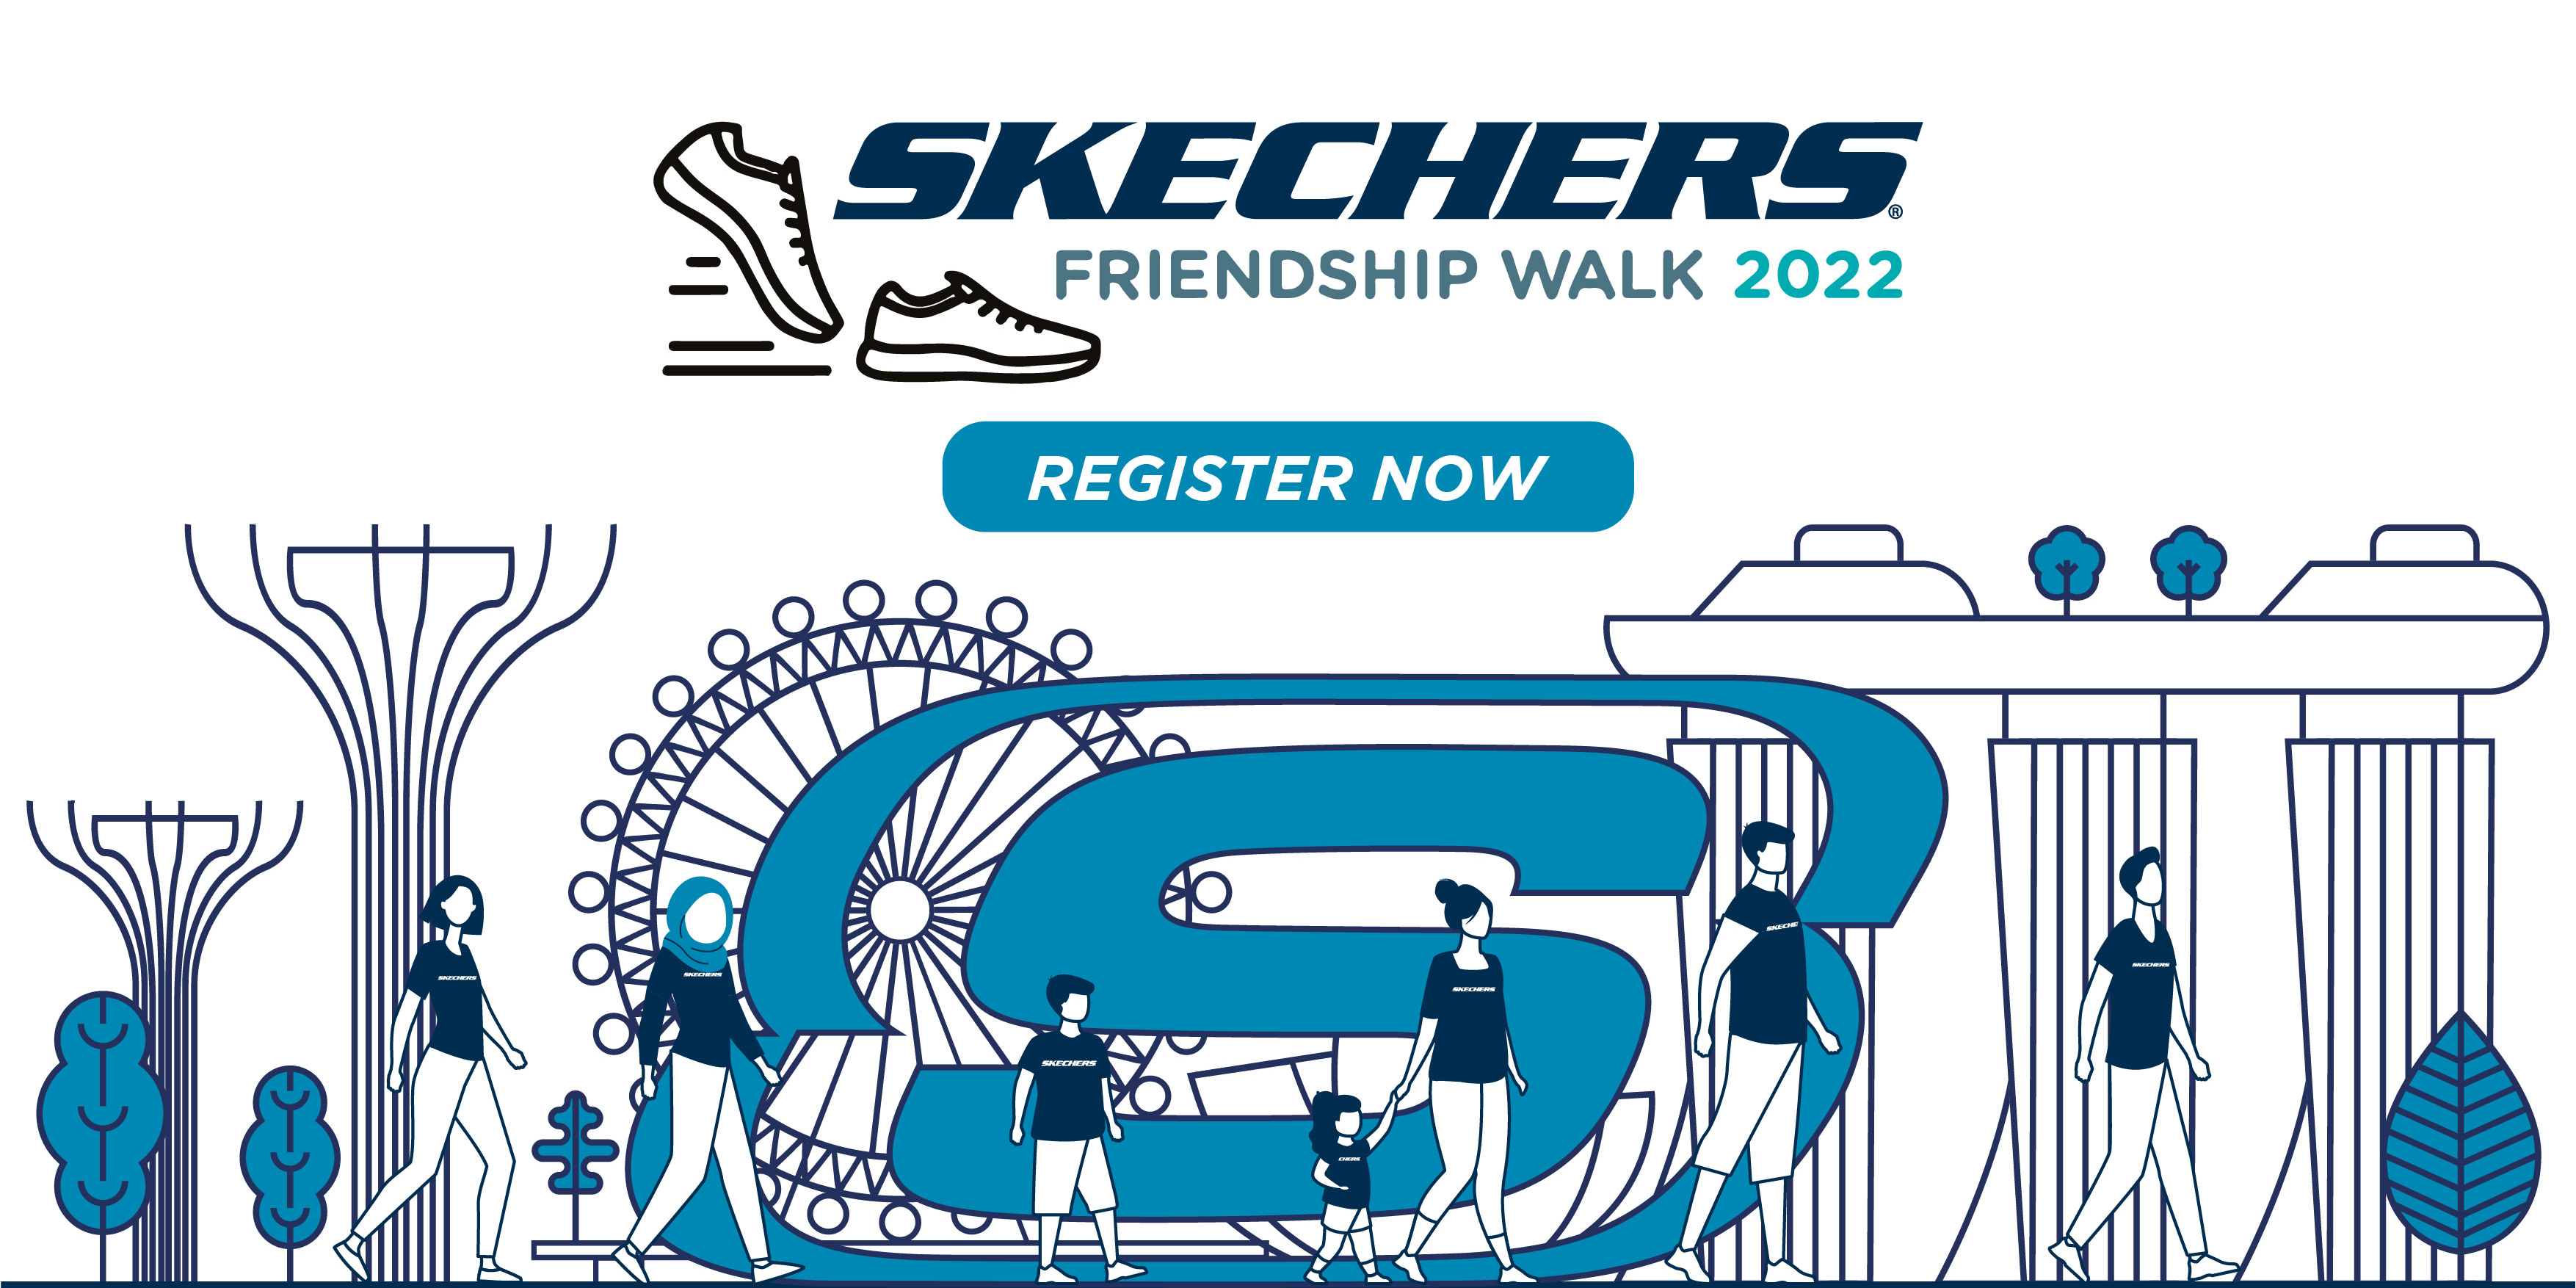 Achieve A Mile(stone) and Bond With Loved Ones At Skechers Friendship Walk 2022